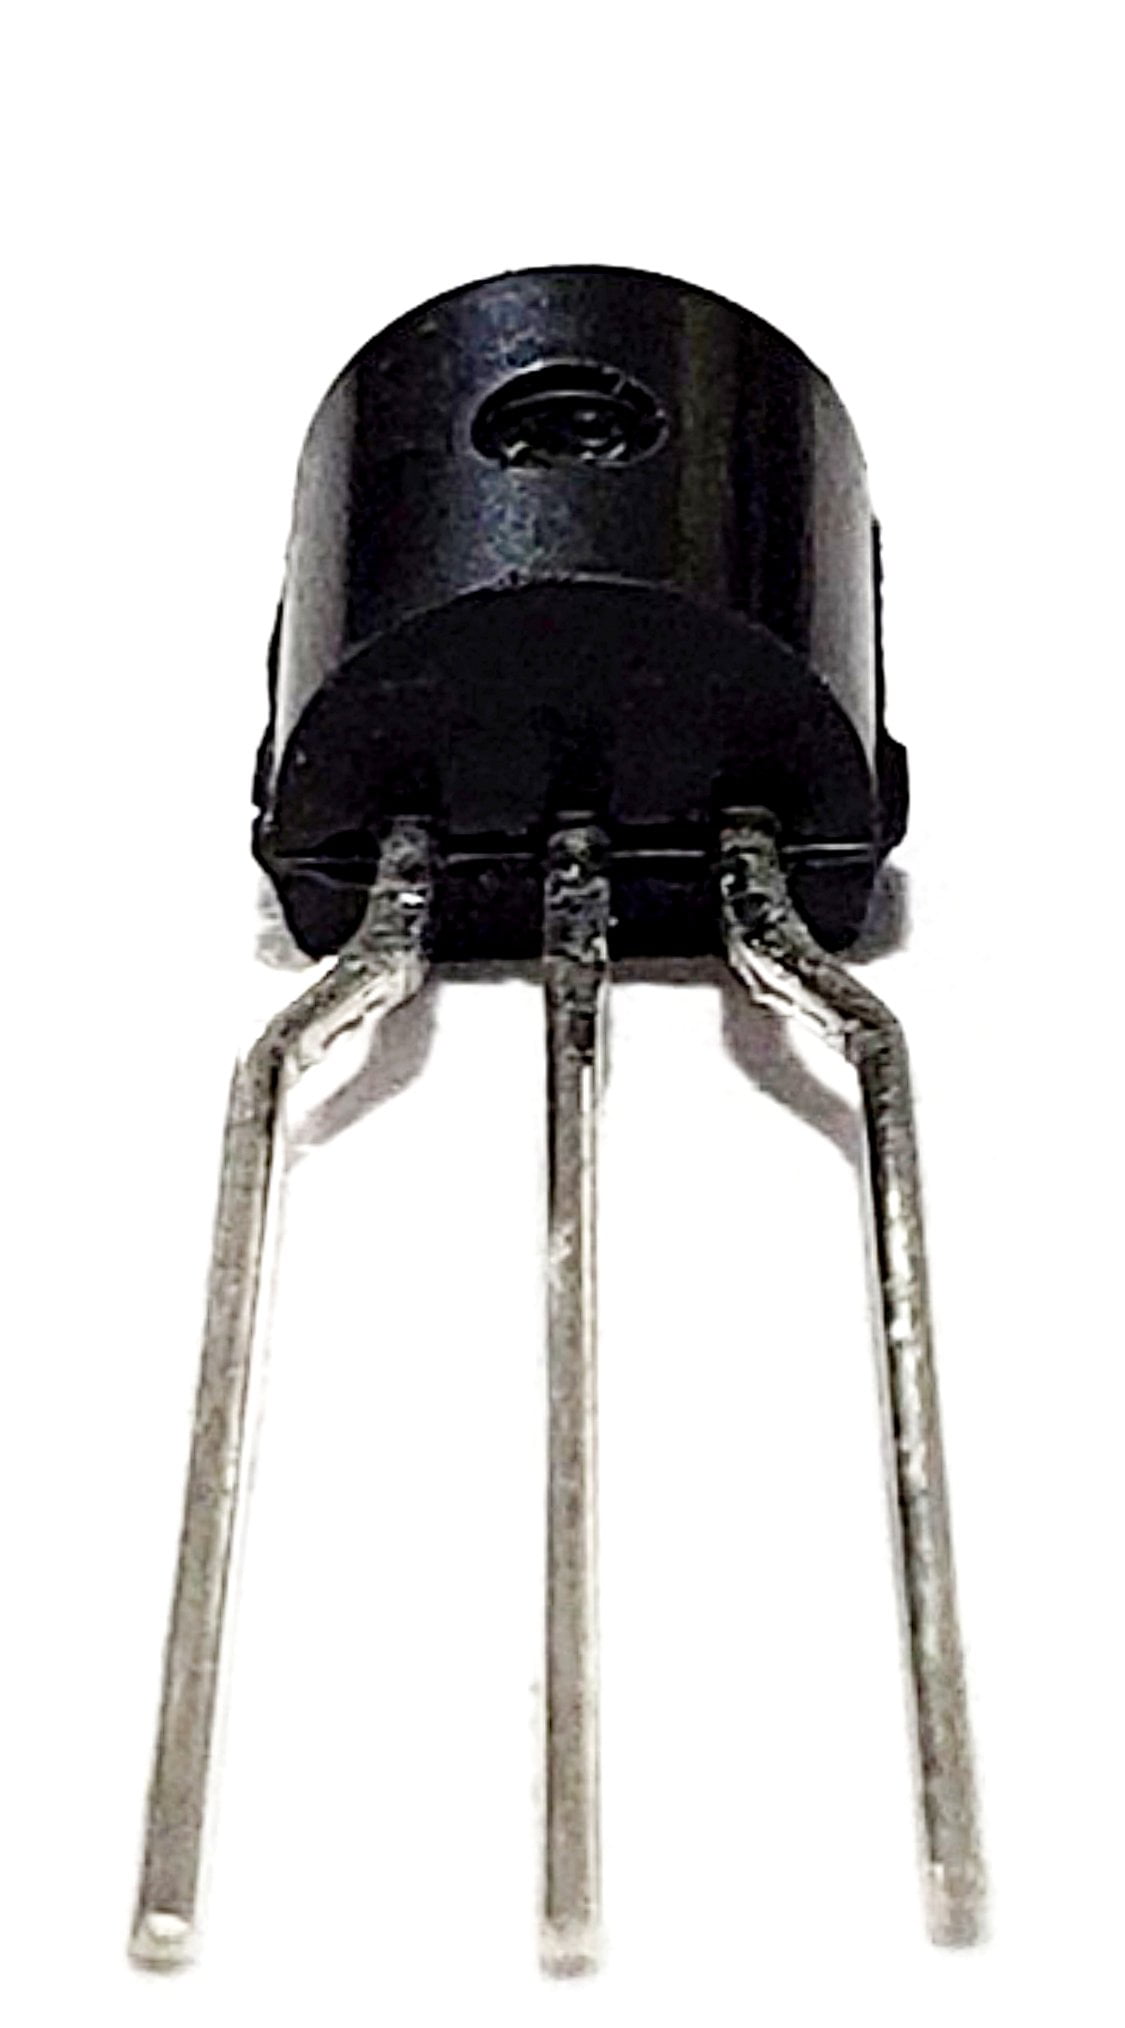 BS170 Mosfet Small Signal Transistor